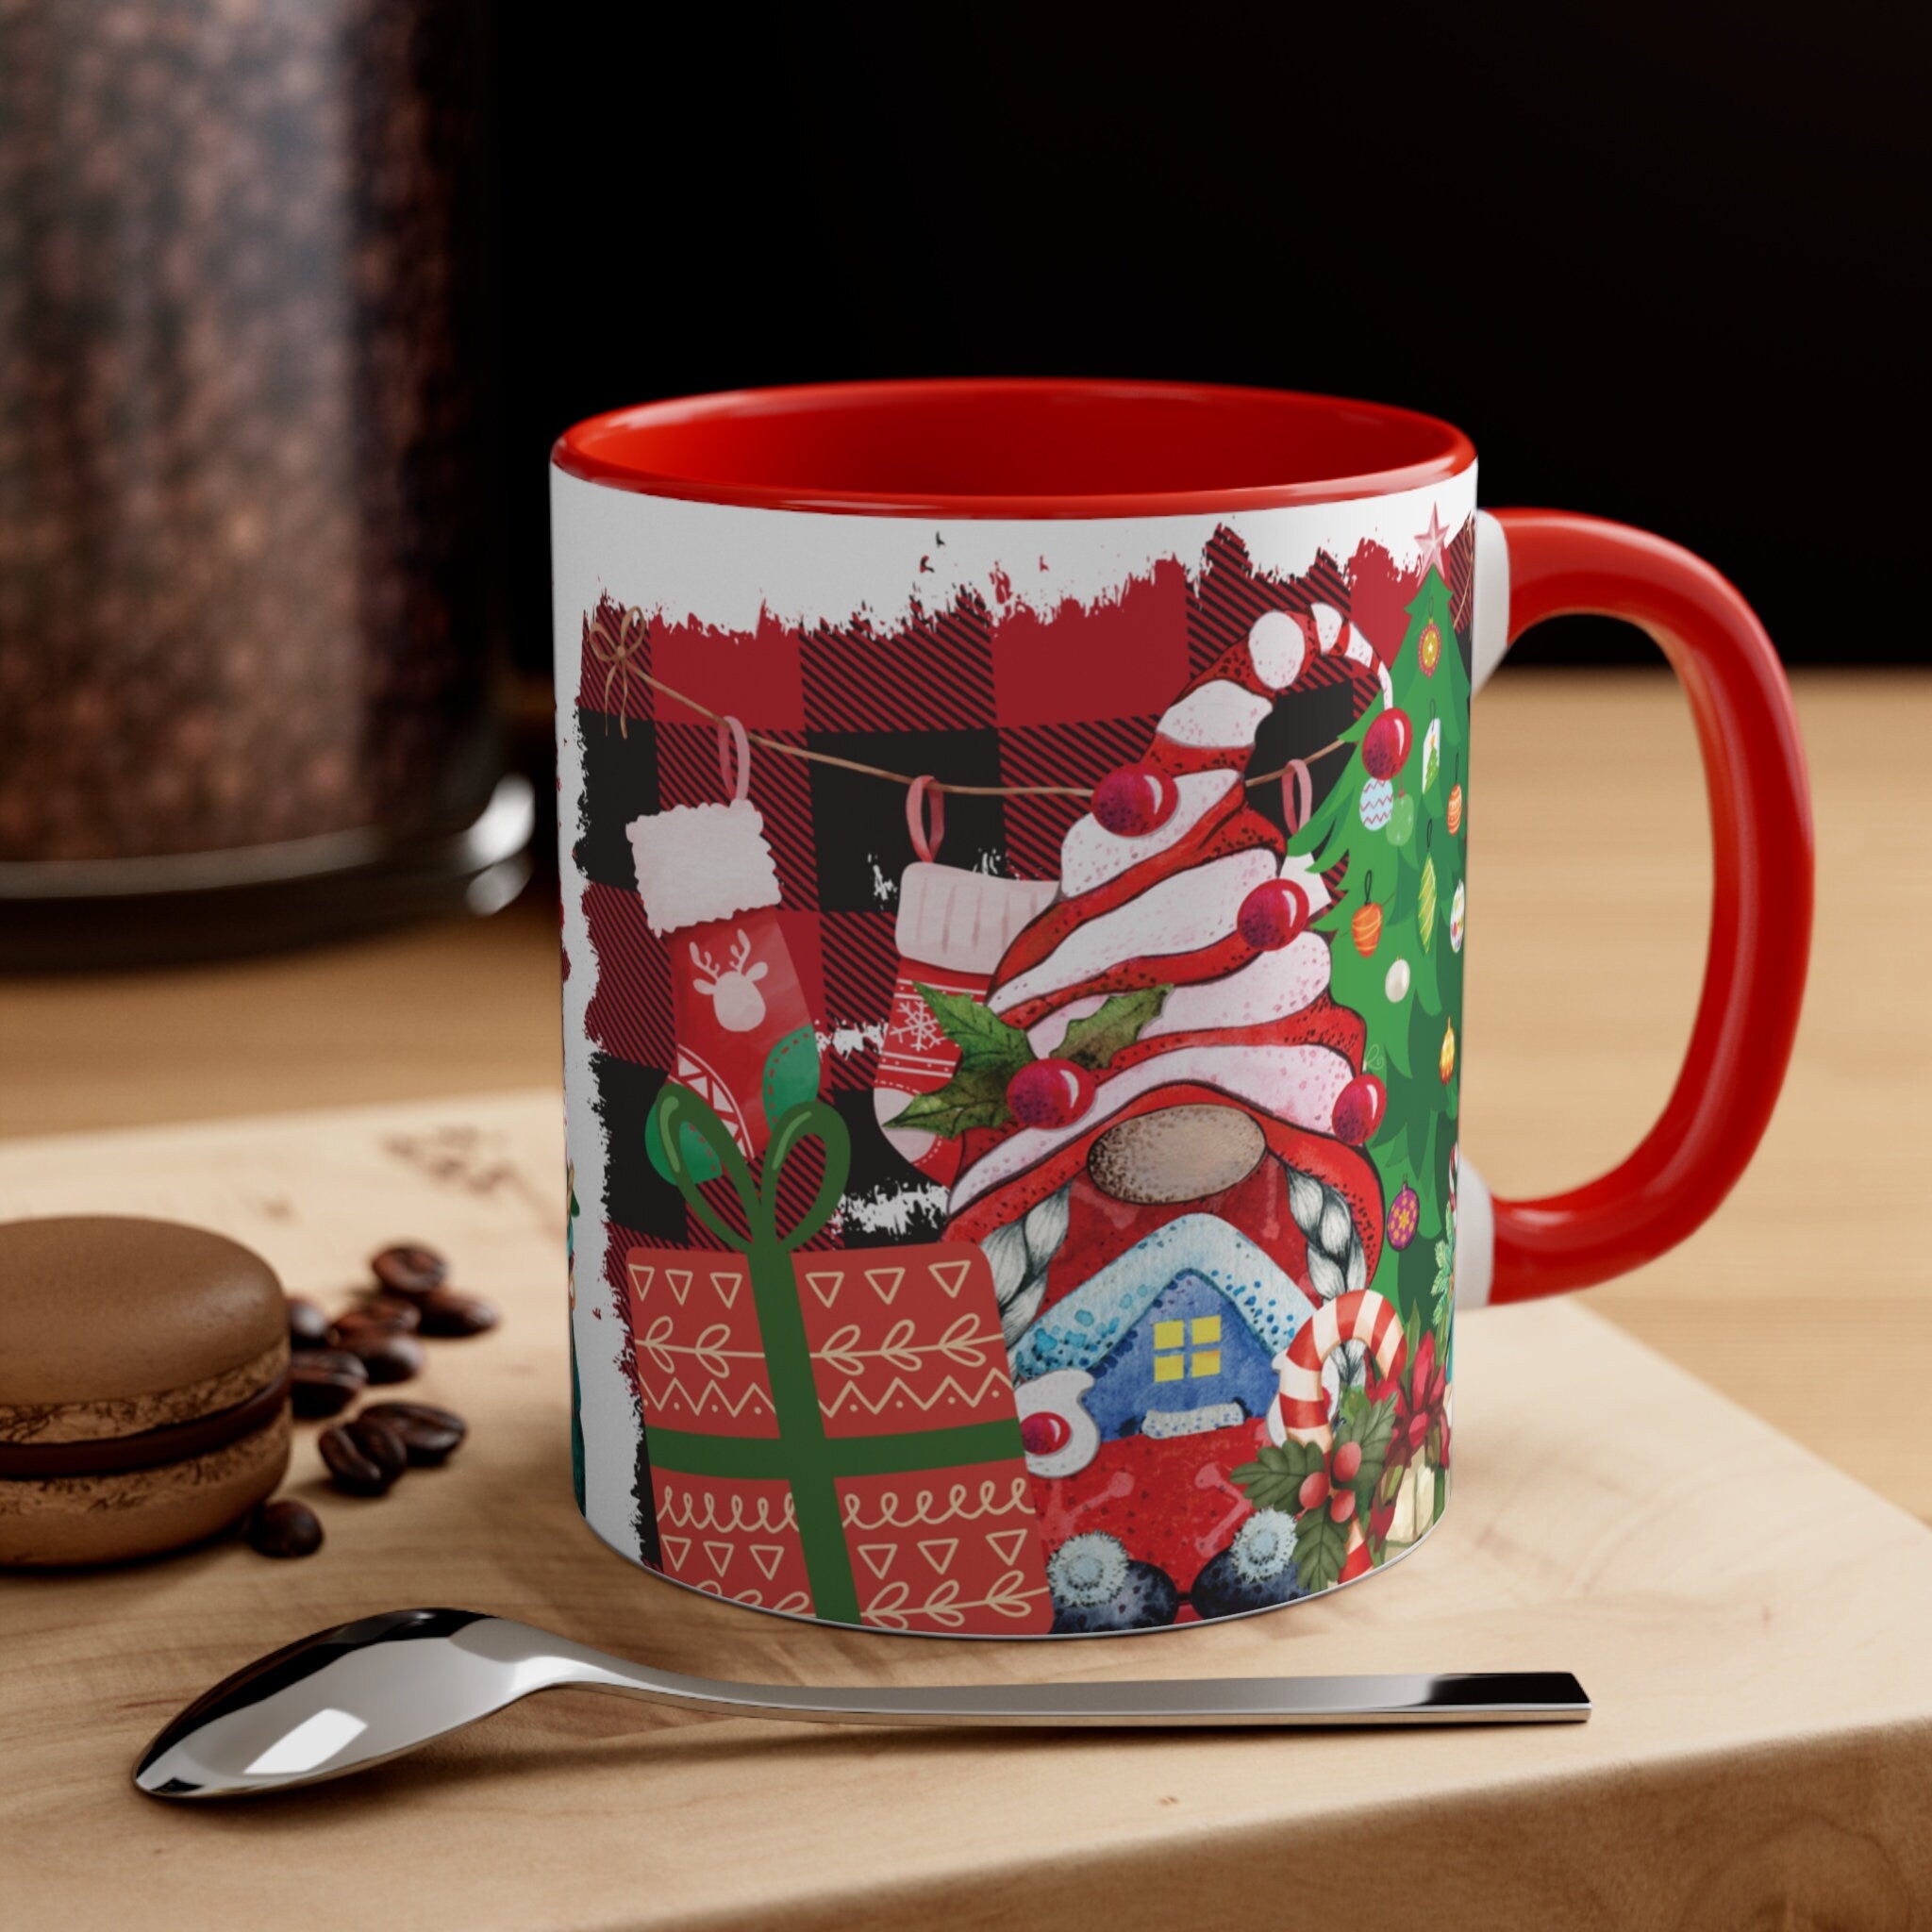 Charming Ceramic Gnome Mug: Whimsical Christmas Decor for Cozy Mornings. Embrace the Holiday Spirit with Every Sip!